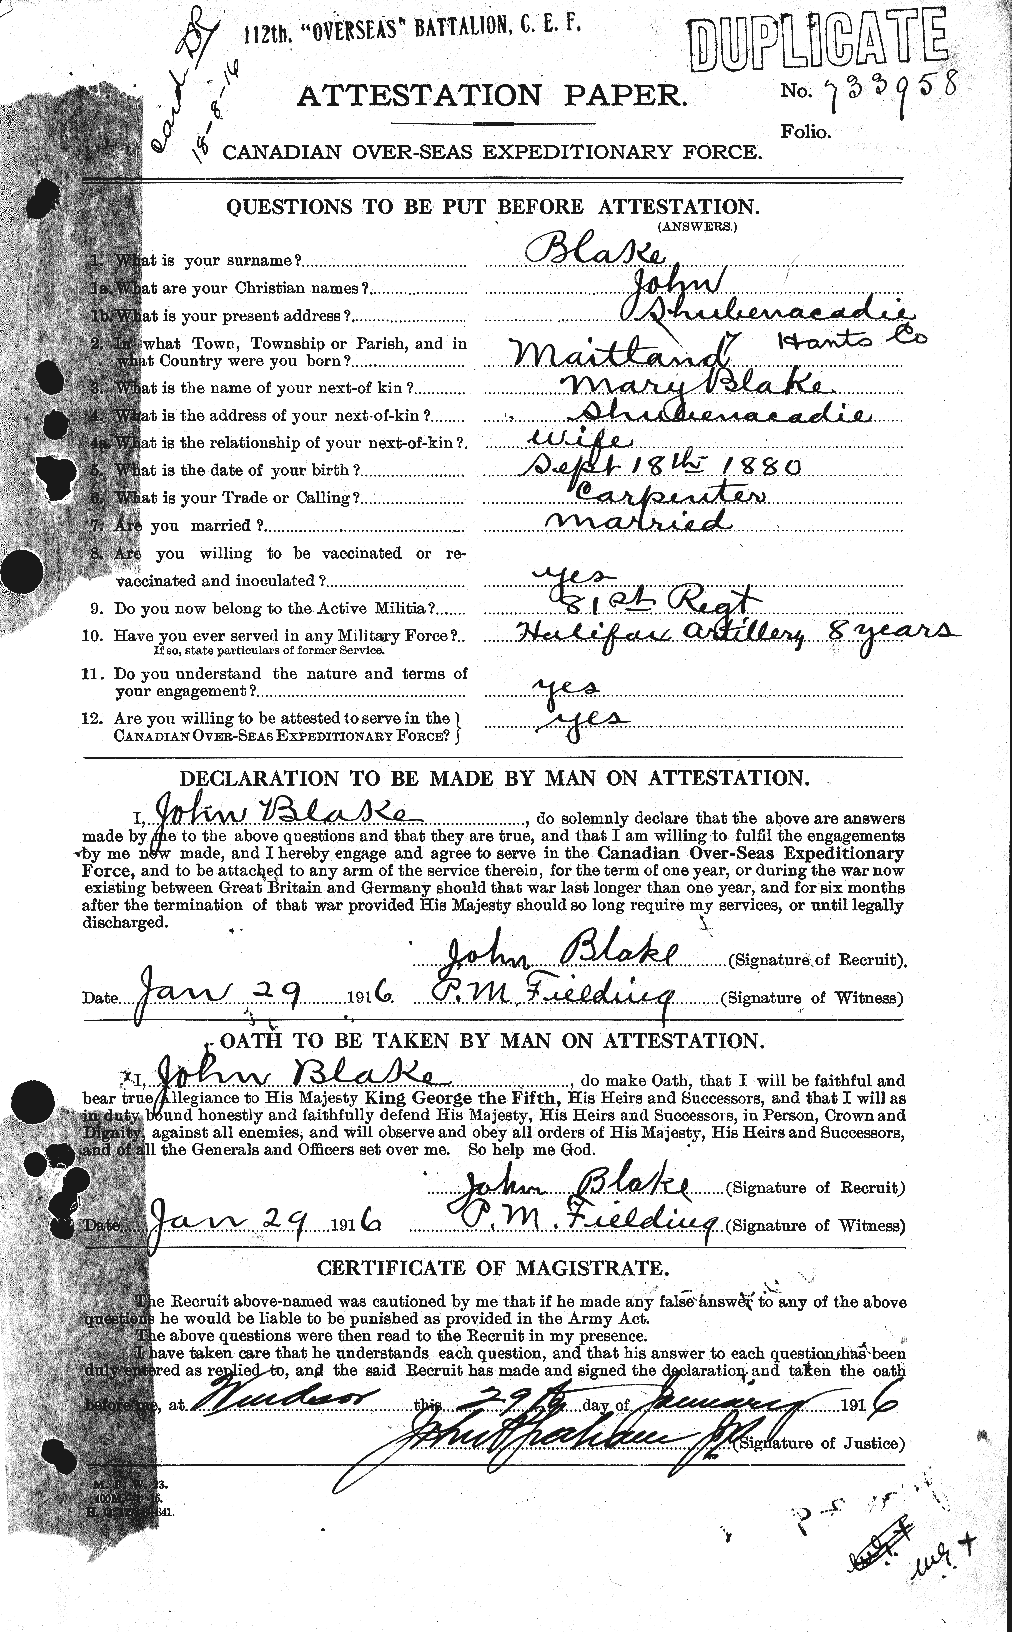 Personnel Records of the First World War - CEF 246548a